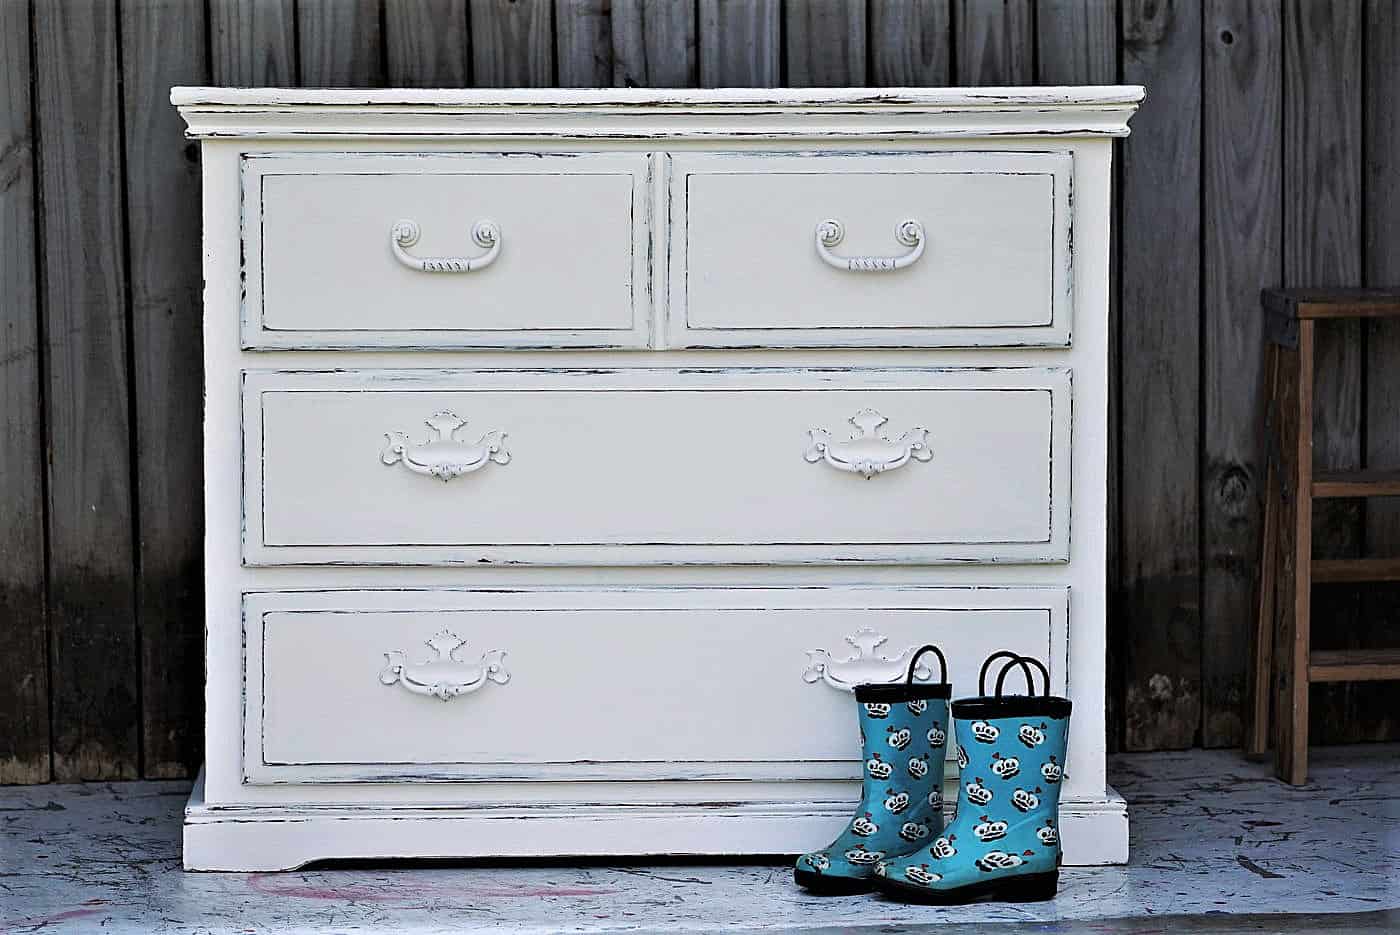 How To Spray Paint Furniture - Cleverly Simple